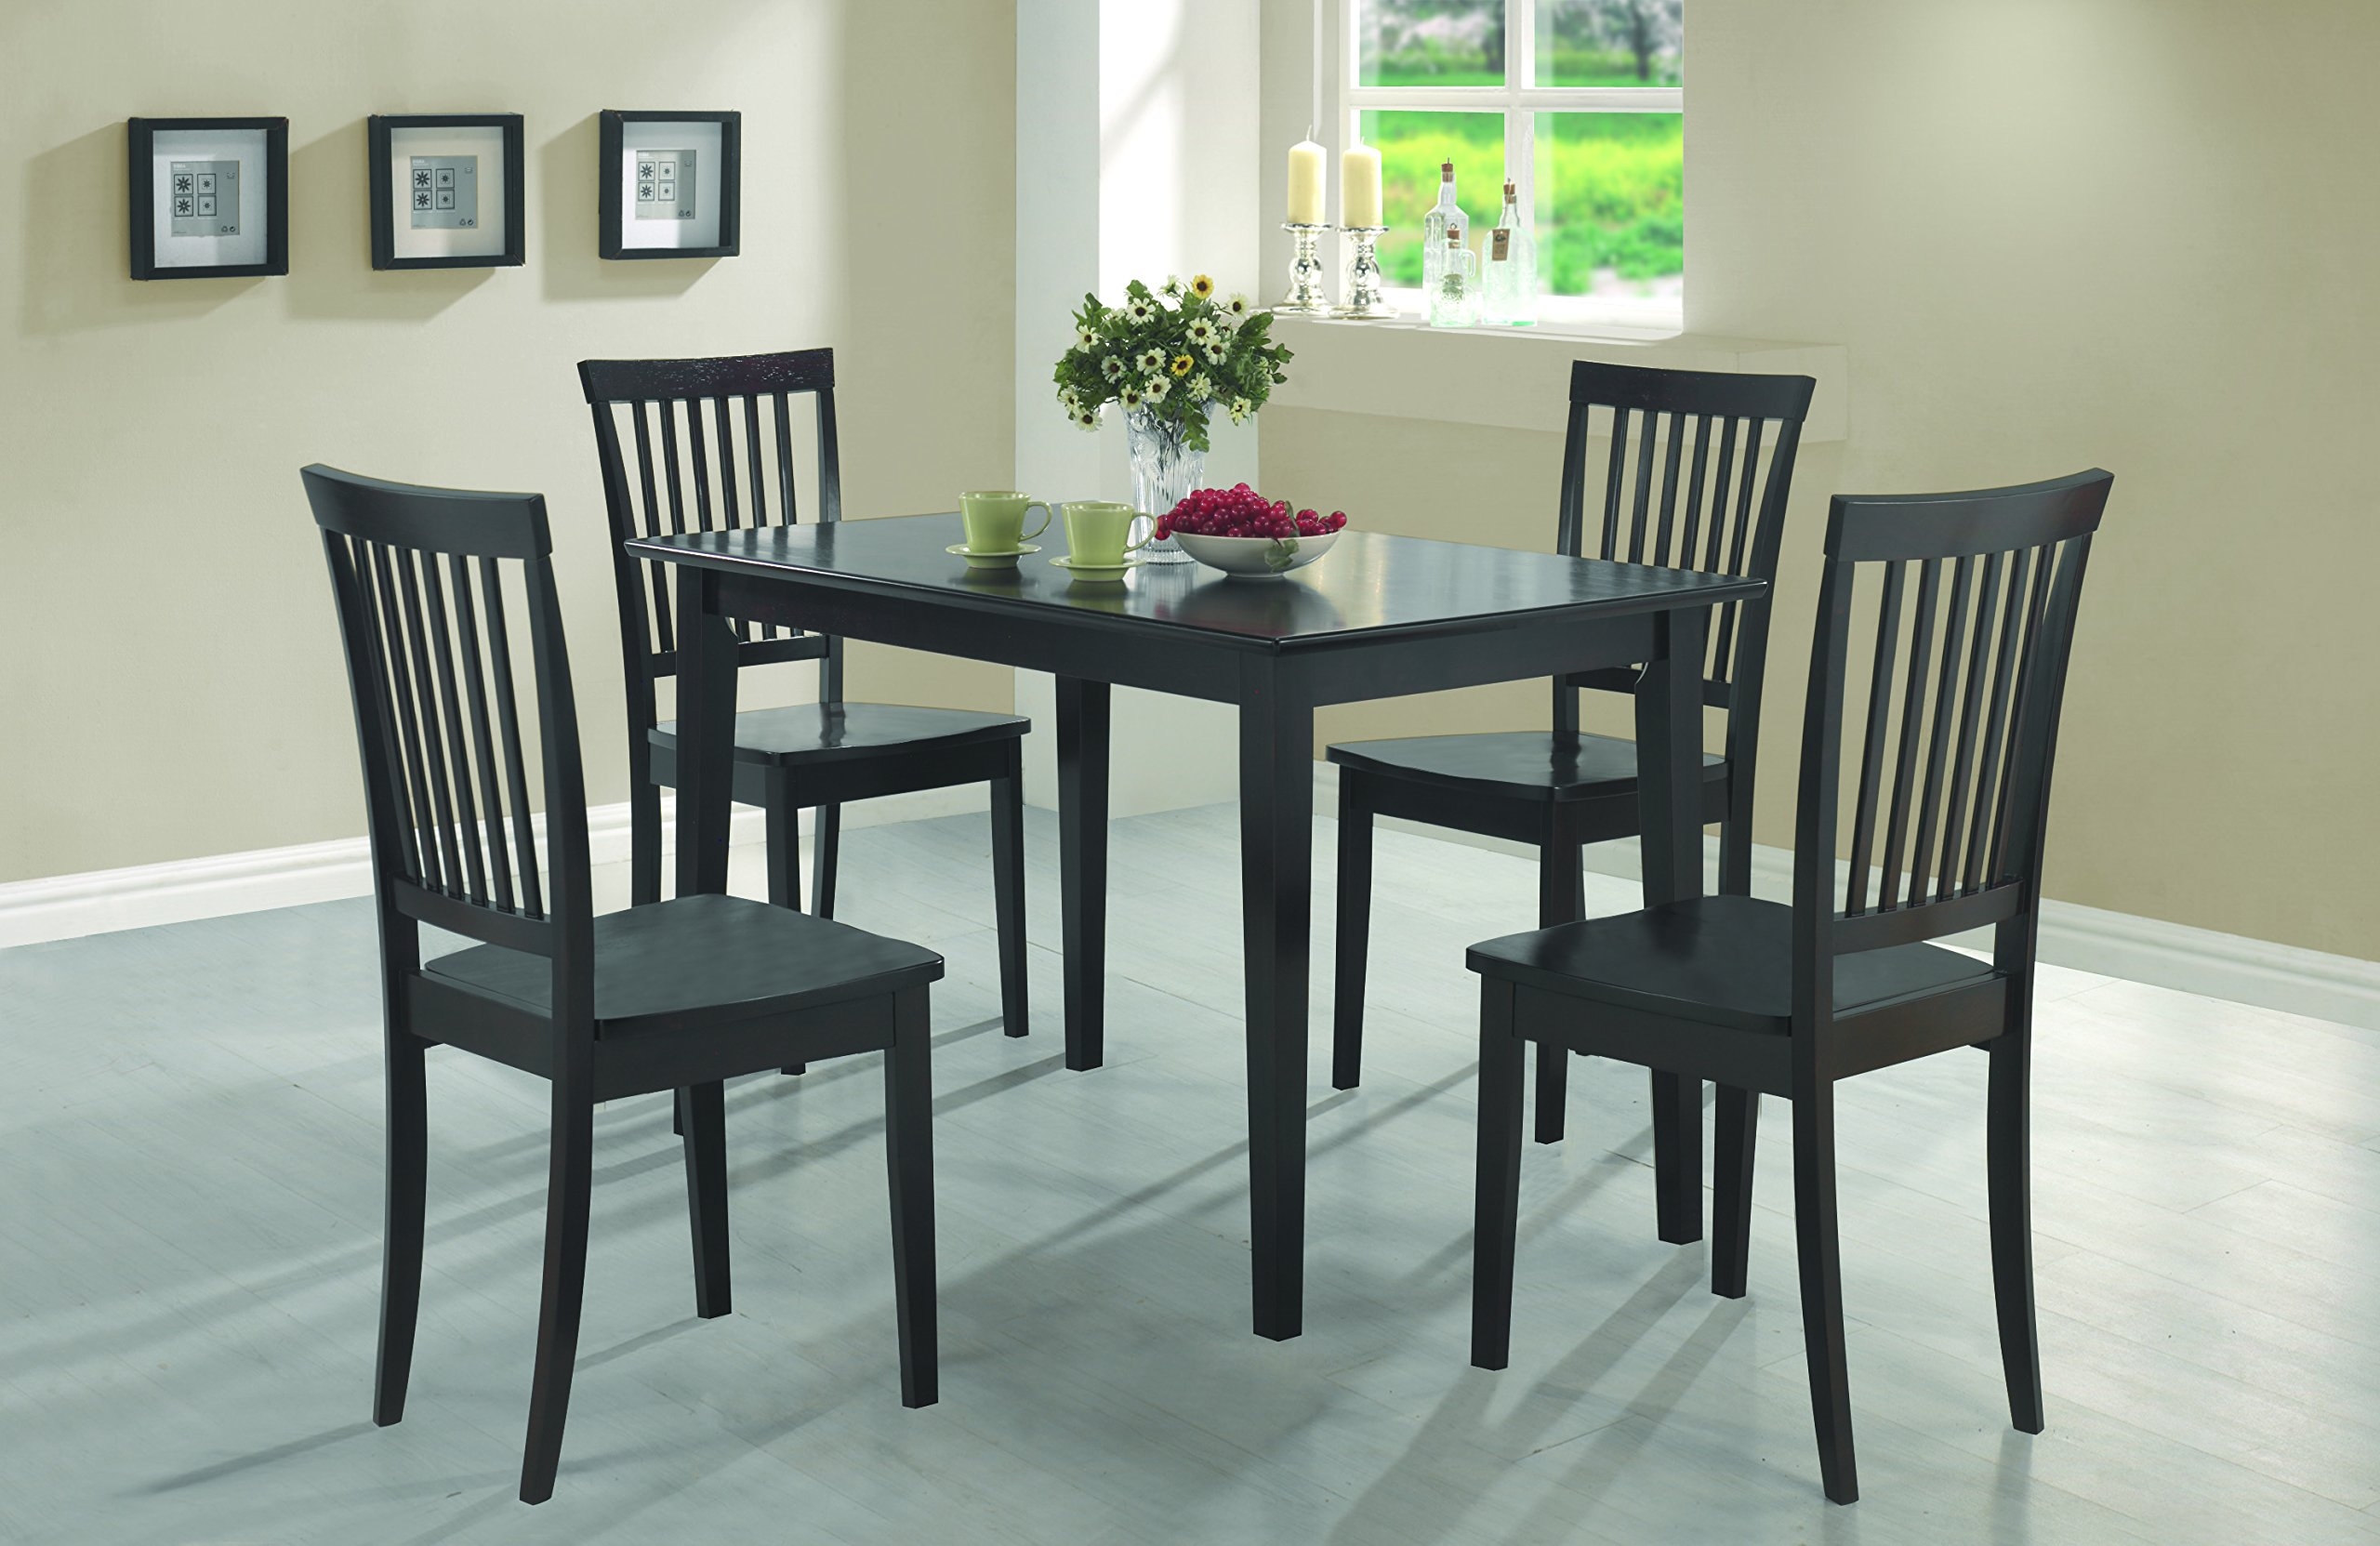 Coaster 5-Piece Dining Set, Table Top with 4 Chairs, Cappuccino Wood